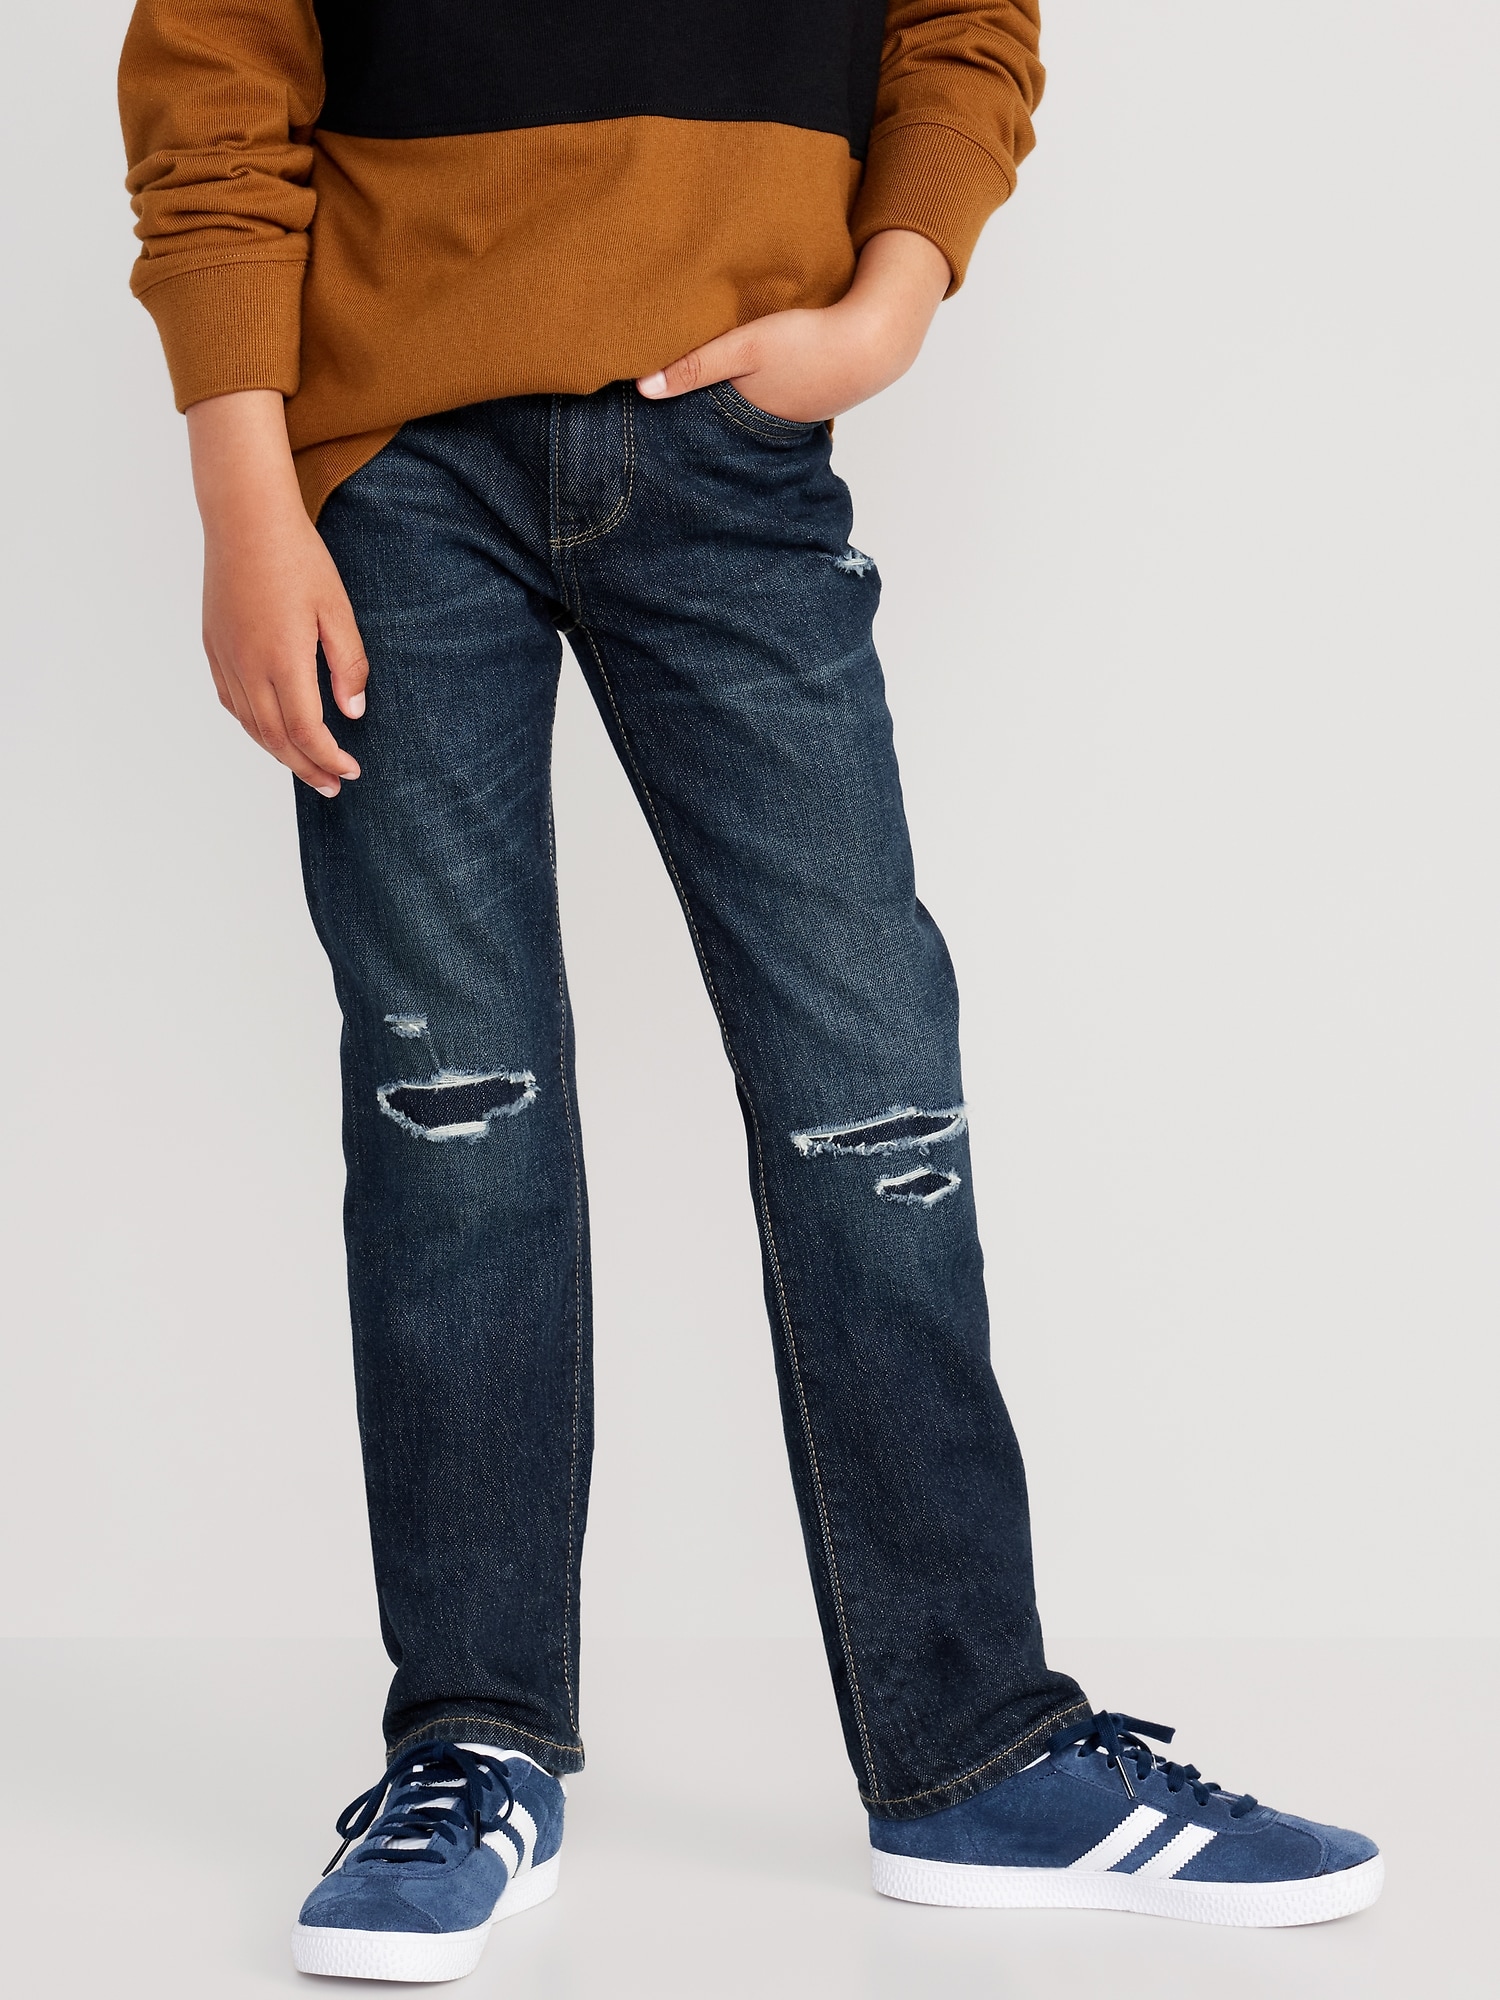 Boys Distressed Jeans | Old Navy